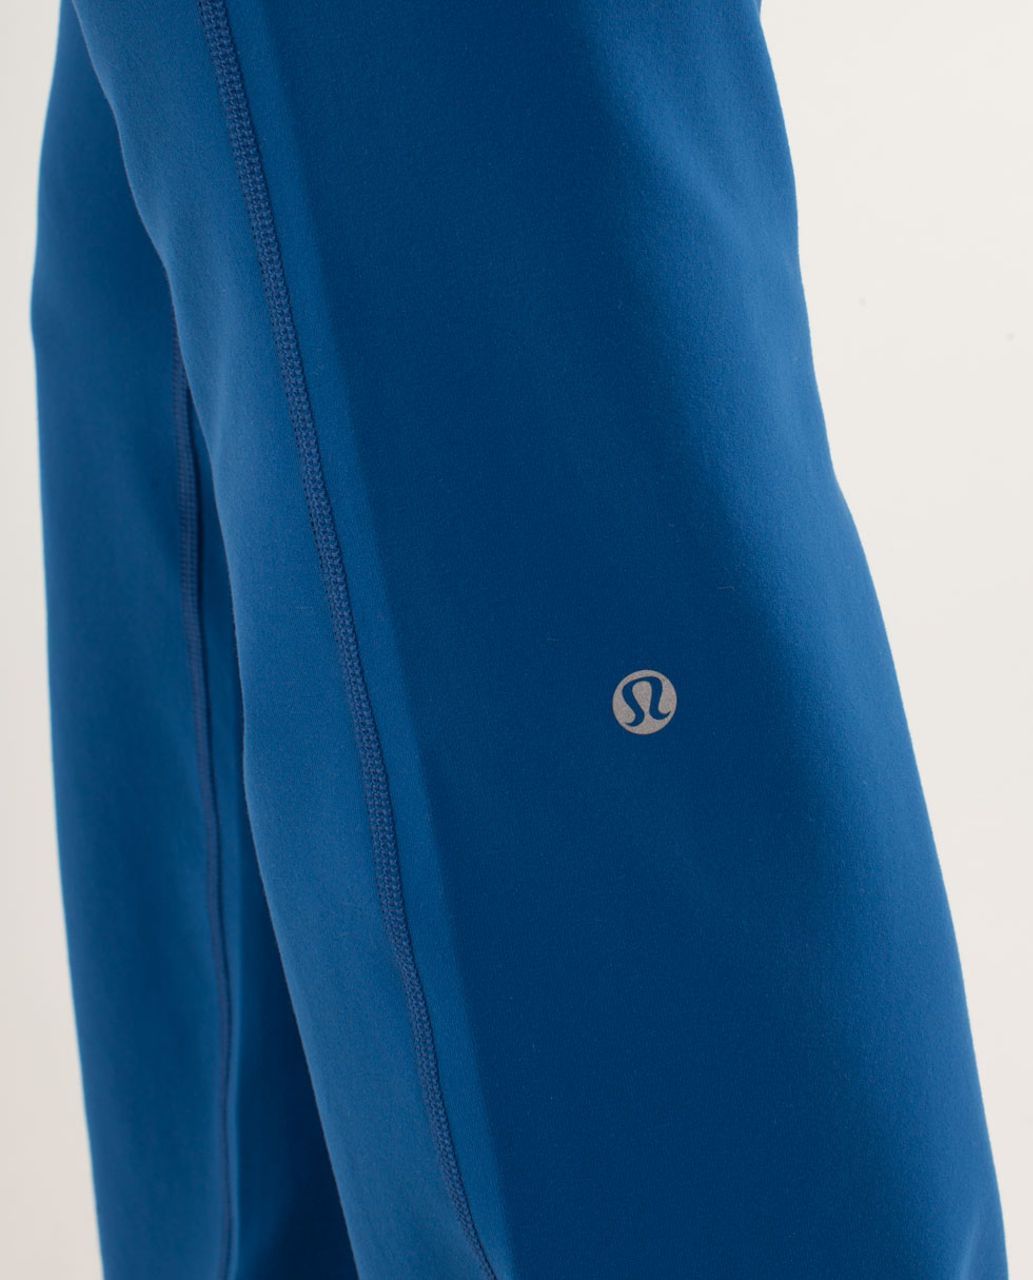 Lululemon Astro Pant (Regular) - Limitless Blue / Wee Are From Space Polar Cream Clarity Yellow / Black